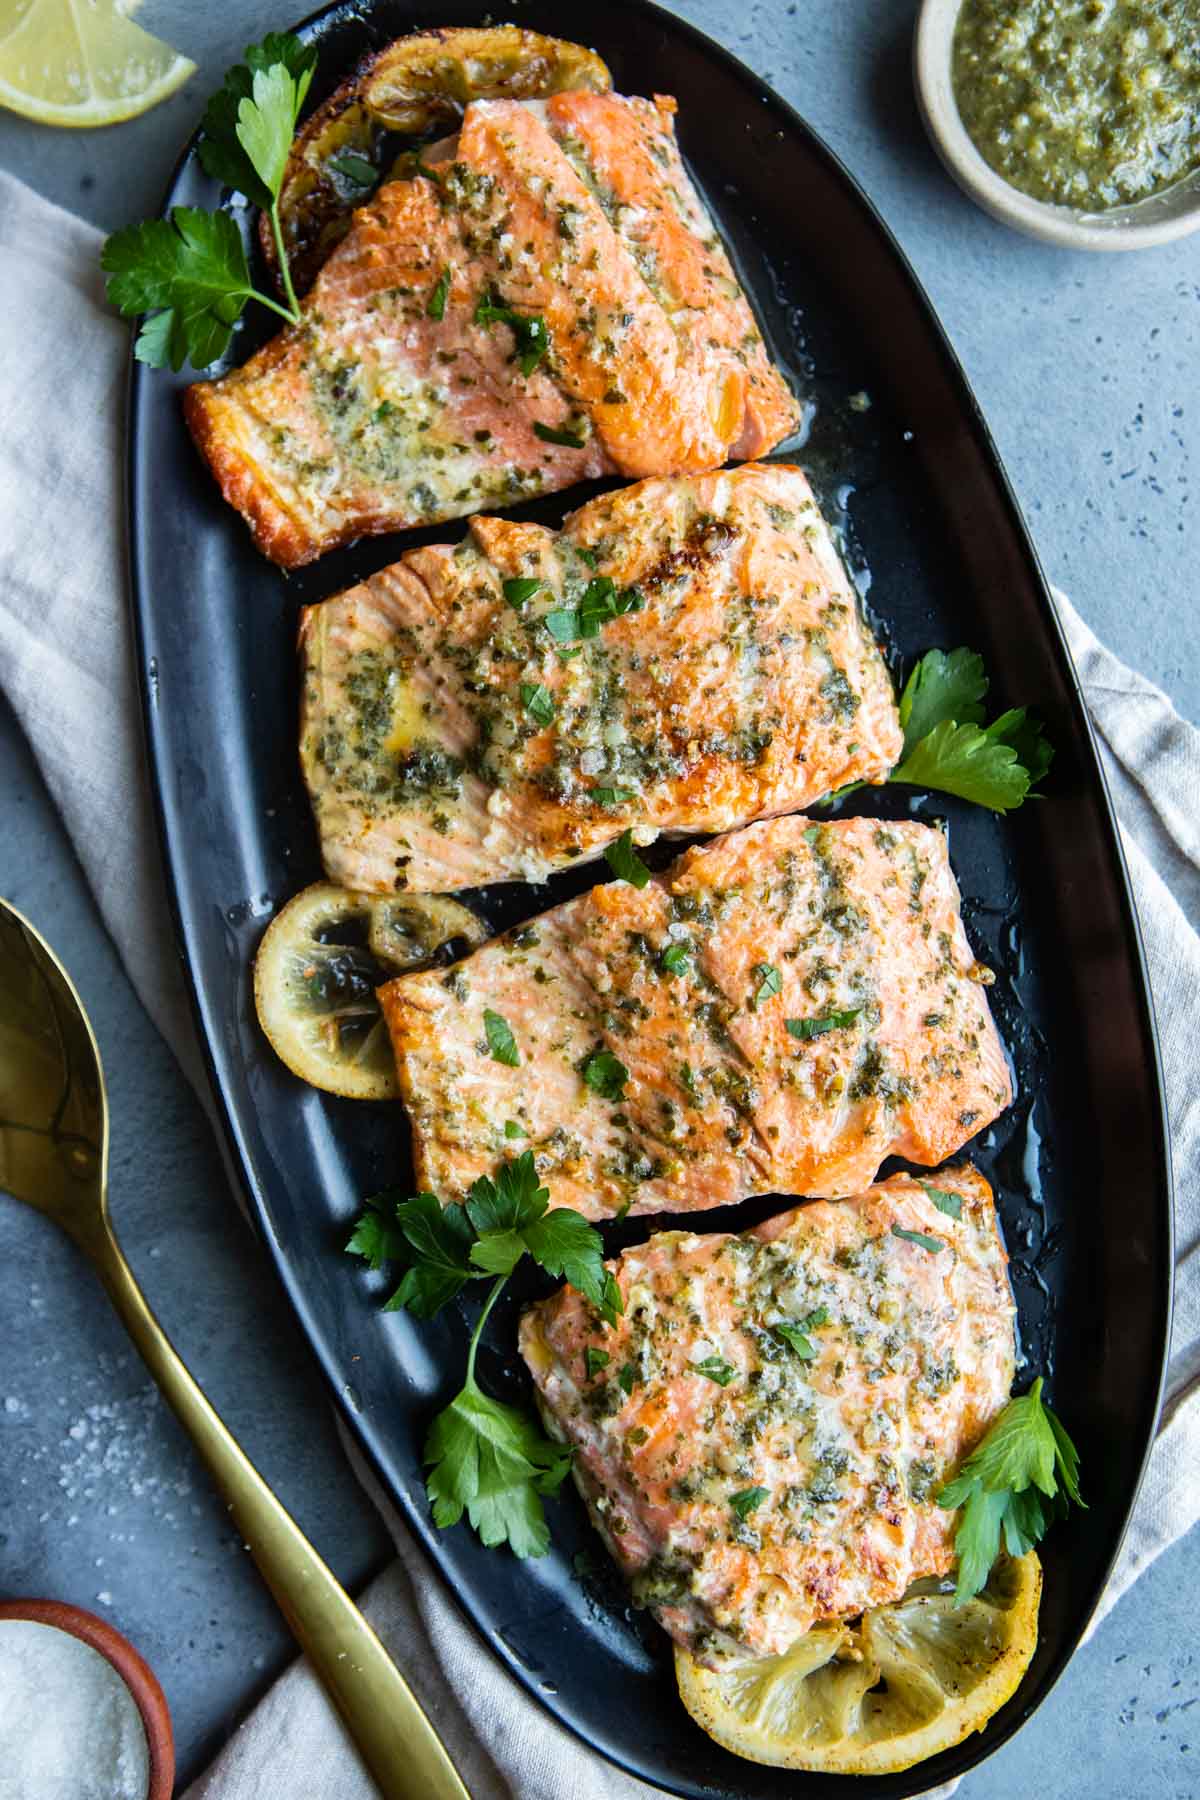 Pesto butter salmon garnished with parsley, served on a serving platter with lemon slices and a serving utensil resting on the side.